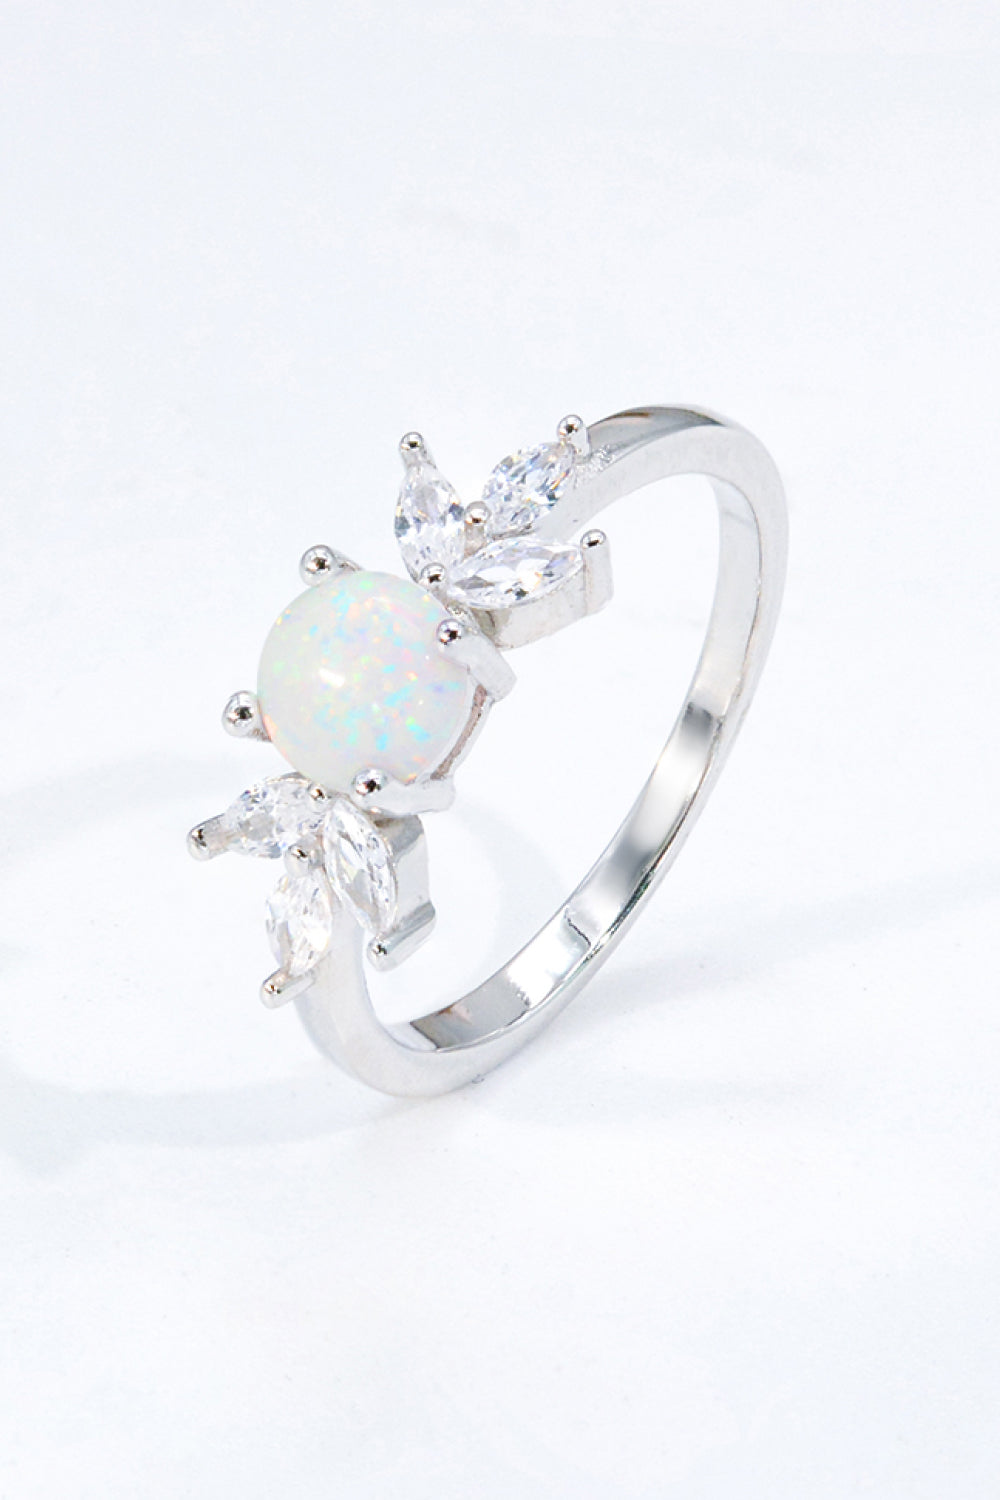 925 Sterling Silver Opal and Zircon Ring-Rings-Inspired by Justeen-Women's Clothing Boutique in Chicago, Illinois